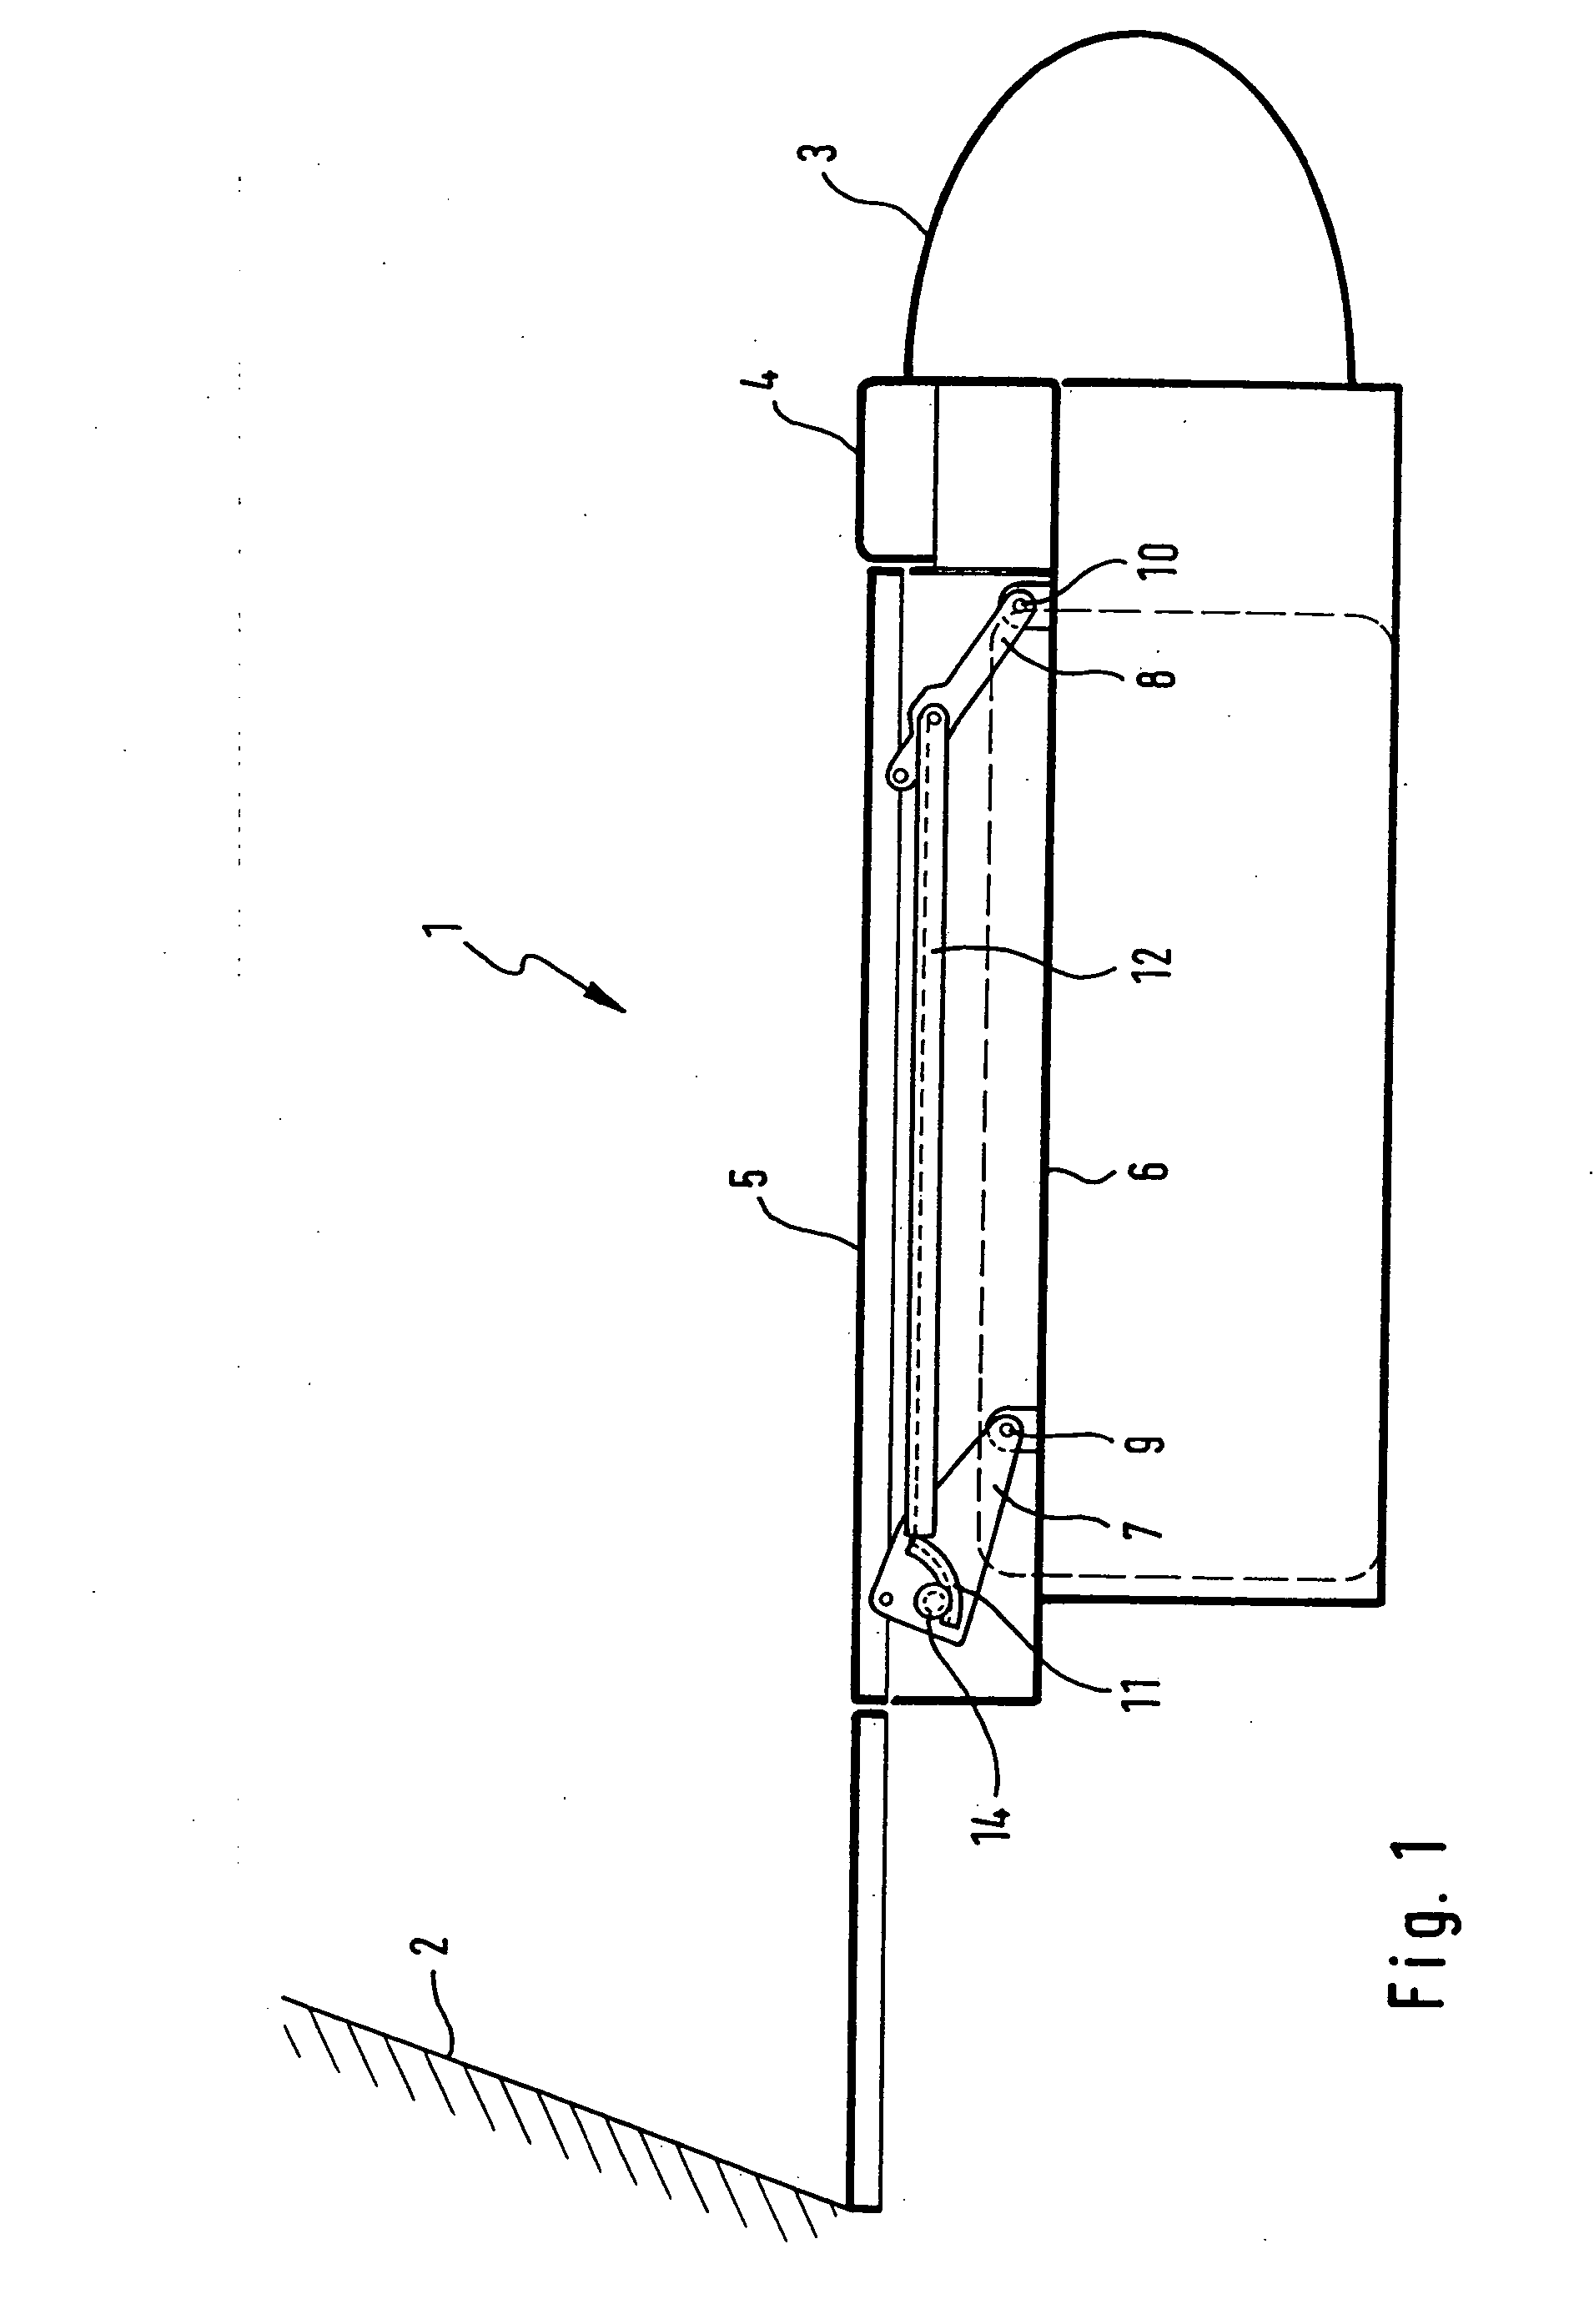 Loading floor for a vehicle and loading apparatus